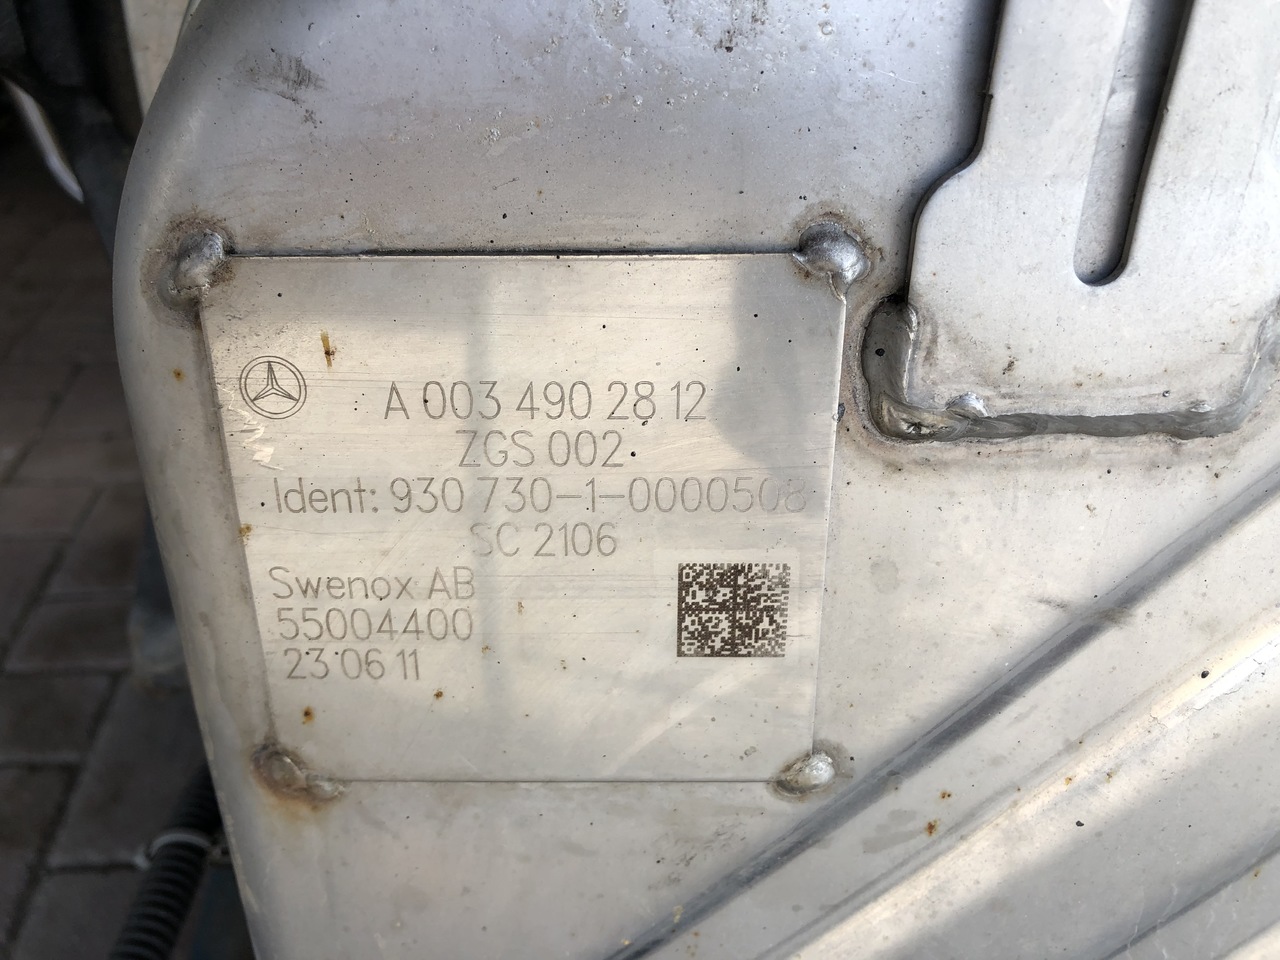 Collettore di scarico per Camion EXHAUST AFTERTREATMENT EURO6-EURO5 MERCEDES ACTROS MP4: foto 3